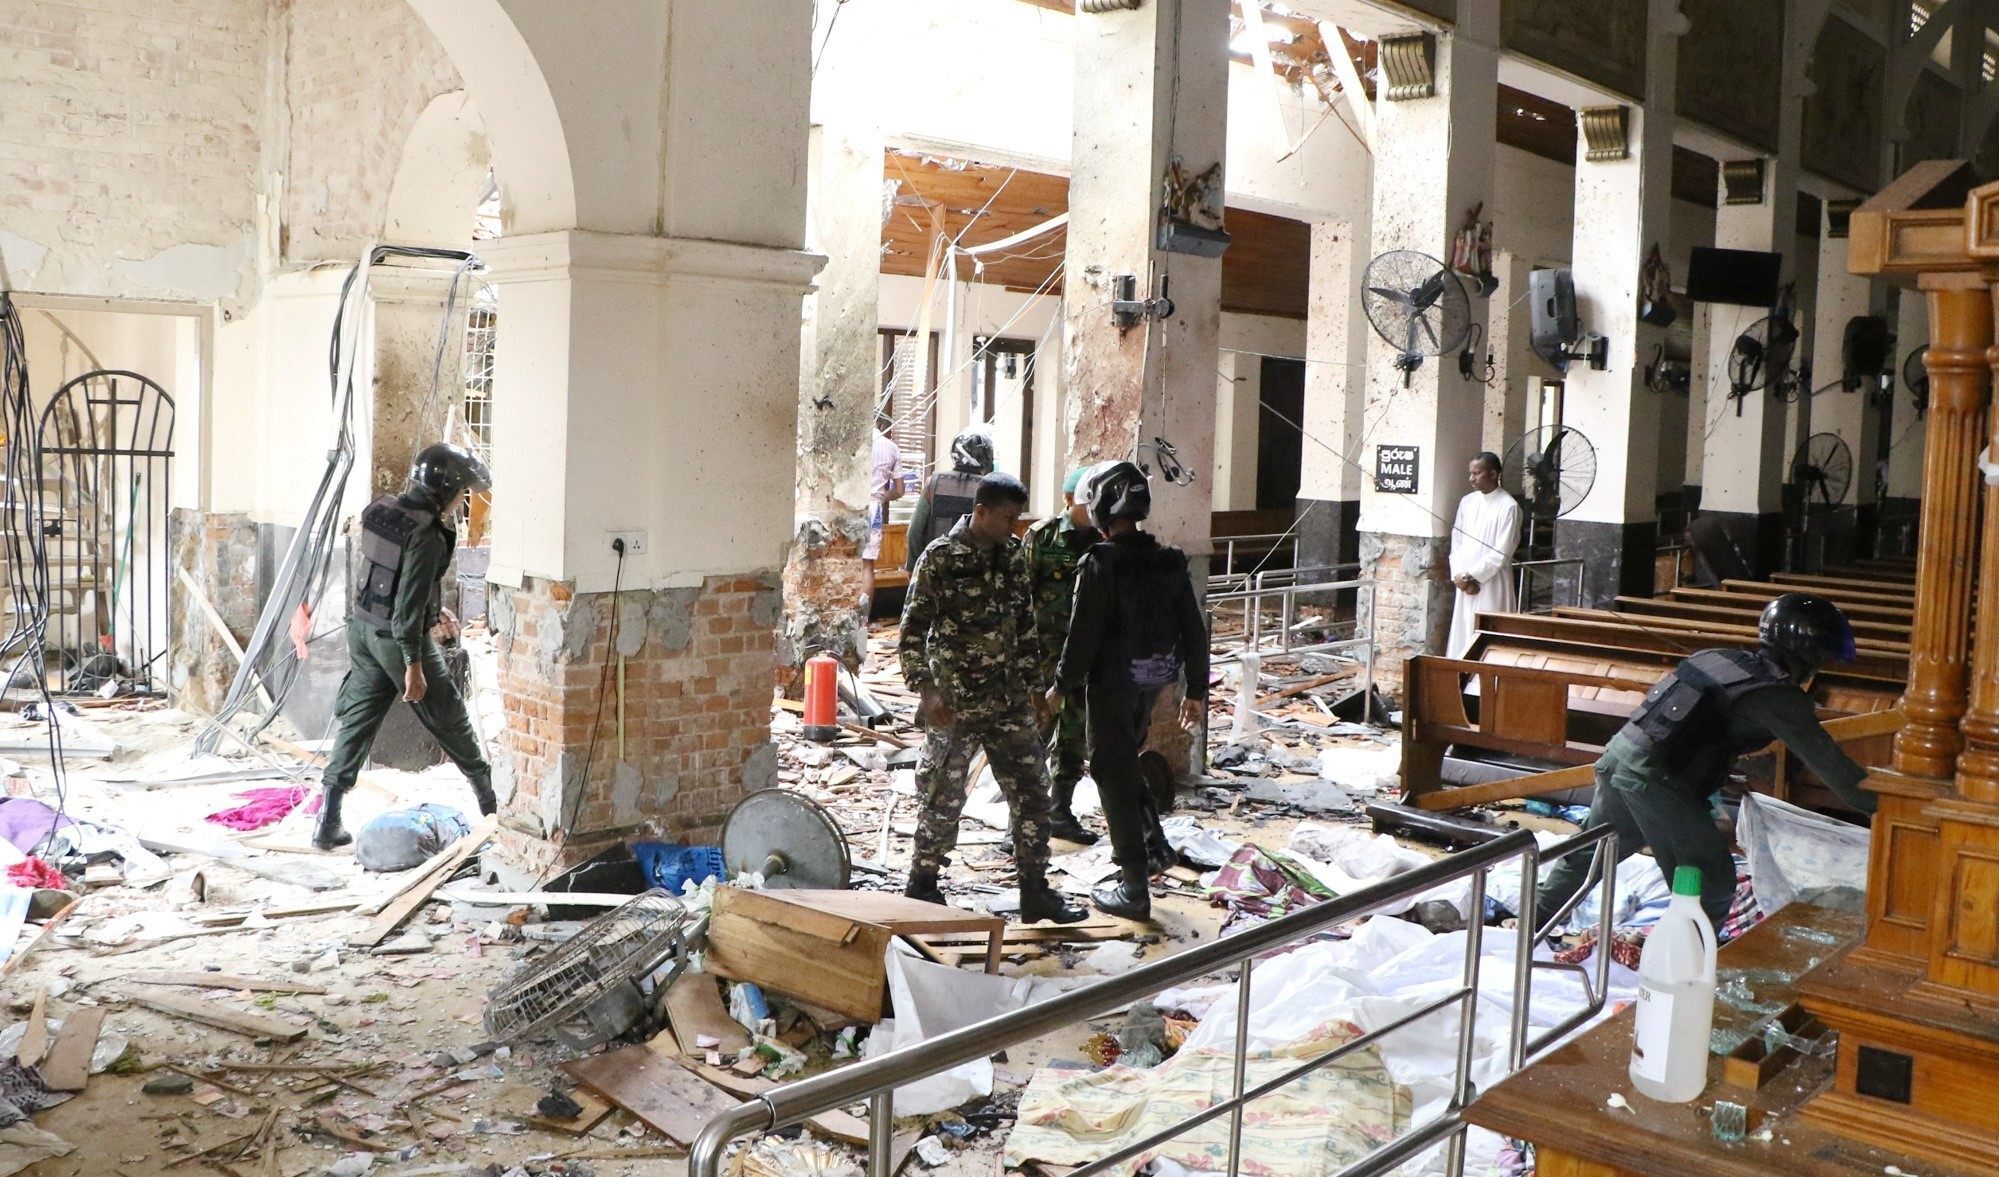 Security forces inspect a church hit by a bomb in Colombo, Sri Lanka in April 2019, when almost 300 people were killed in Easter Sunday blasts. Now a Sri Lankan court has ordered the release of a lawyer arrested over his alleged ties to the bombings and held for nearly two years on charges rights groups say lacked evidence. Photo: Getty Images